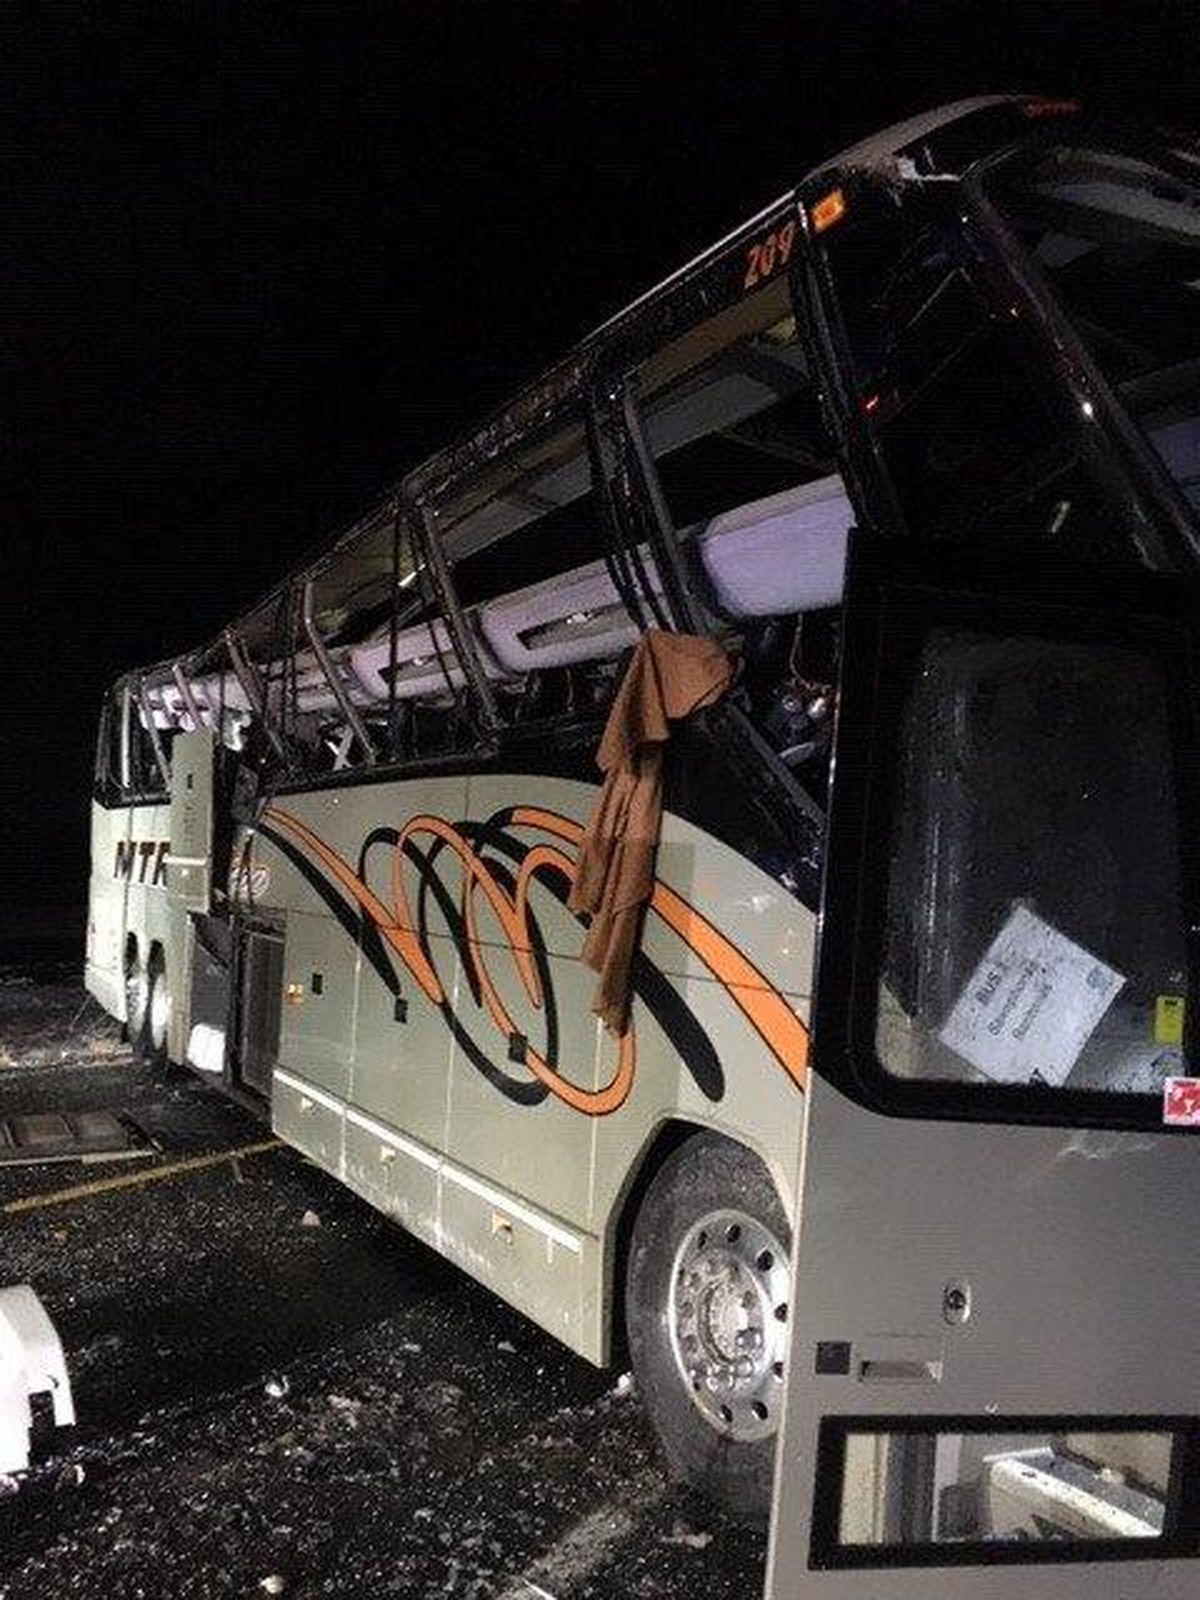 A charter bus carrying members of the University of Washington marching band rolled onto its side Thursday evening on an icy stretch of Interstate 90 near George, Washington. The band subsequently canceled its trip to Pullman, where it was scheduled to perform Friday night during the Apple Cup rivalry game against Washington State University. (Washington State Patrol)